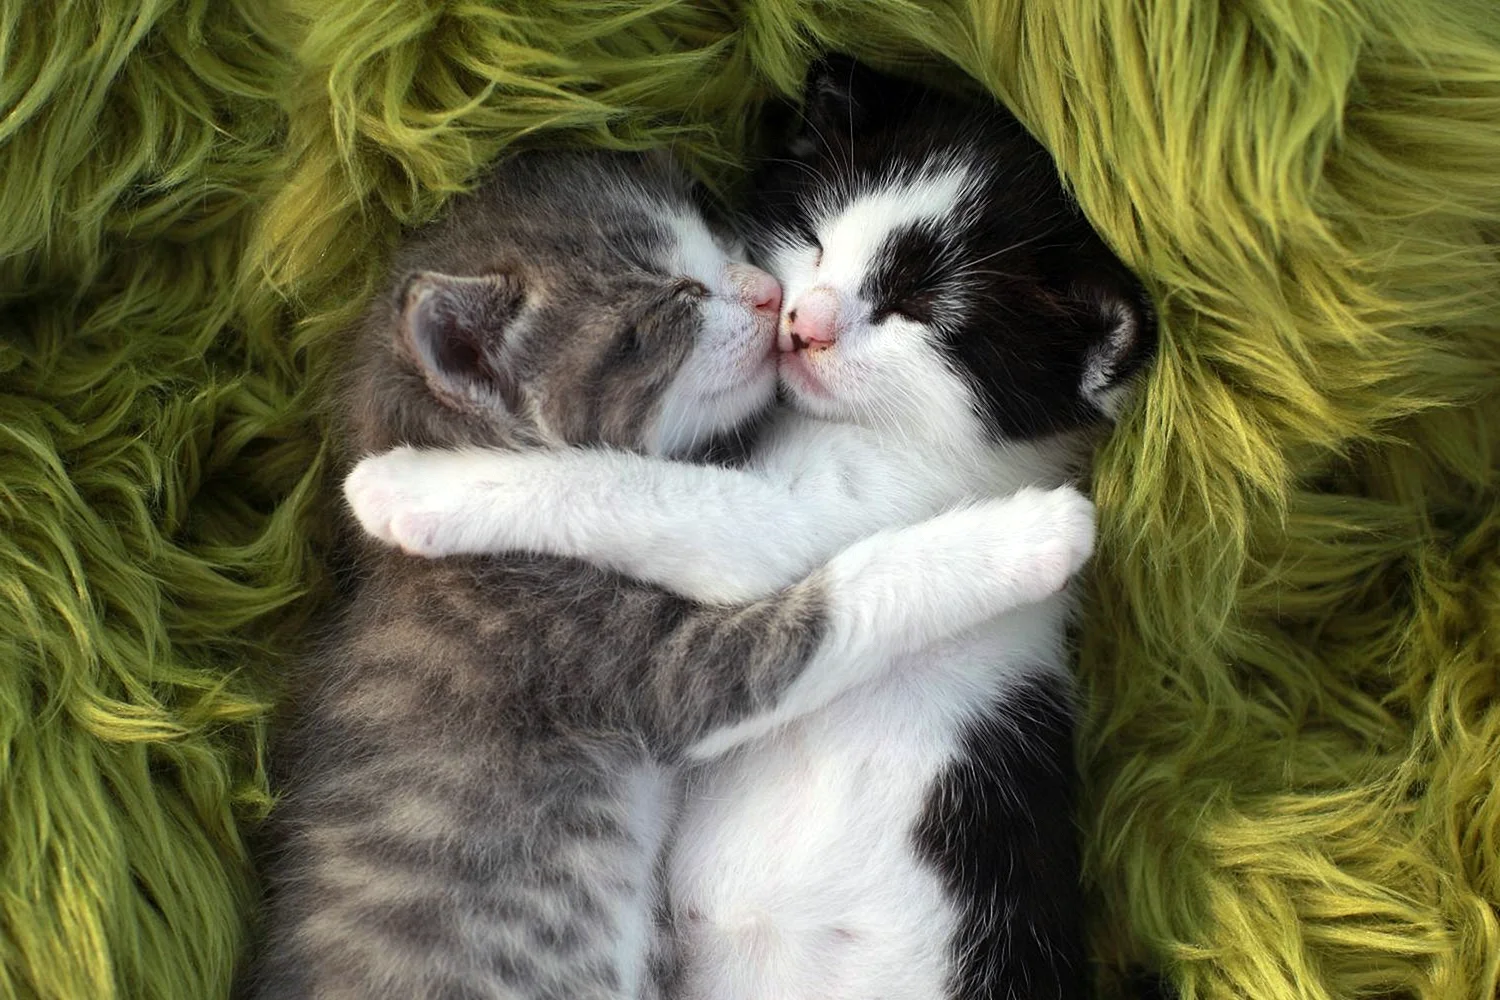 Hugs to you Cats